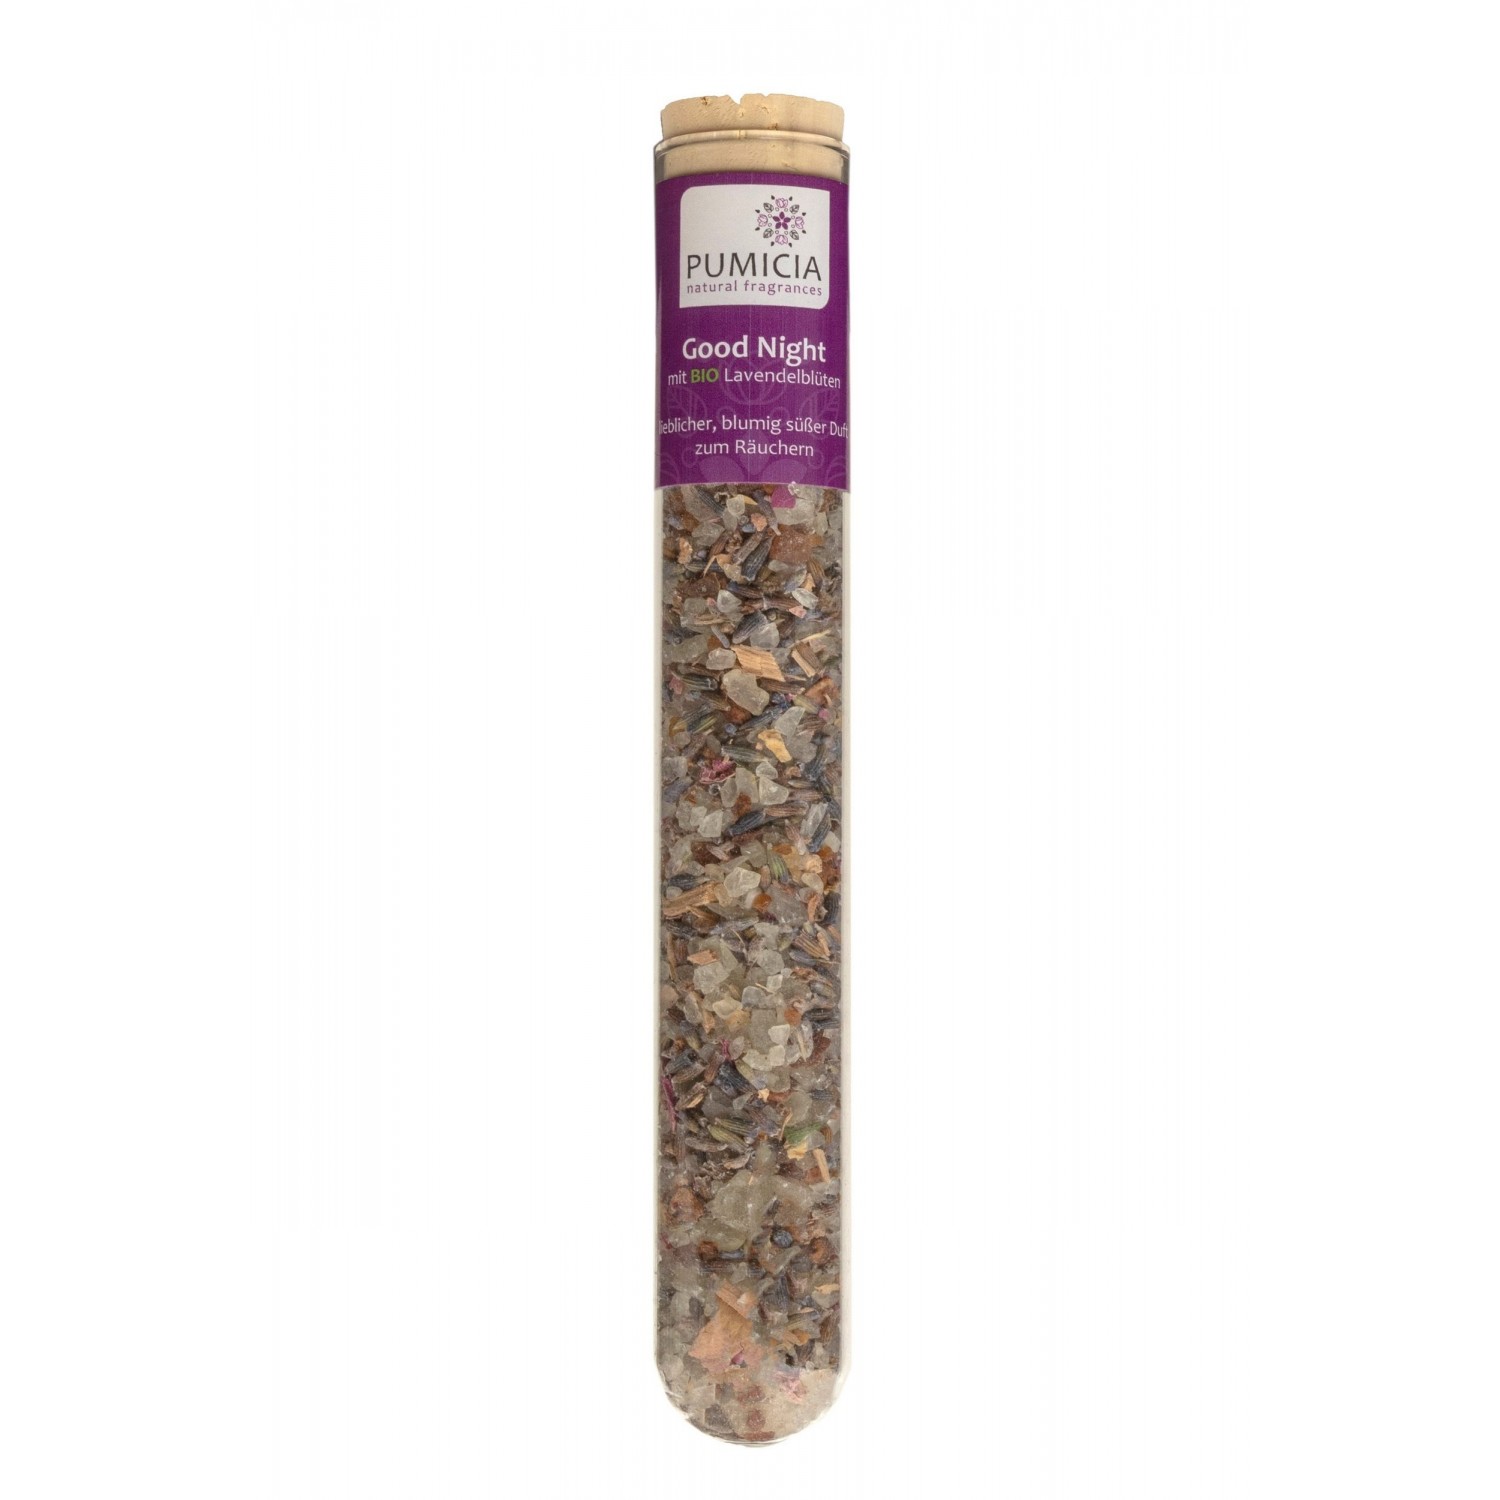 Pumicia Good Night with organic Lavender Incense